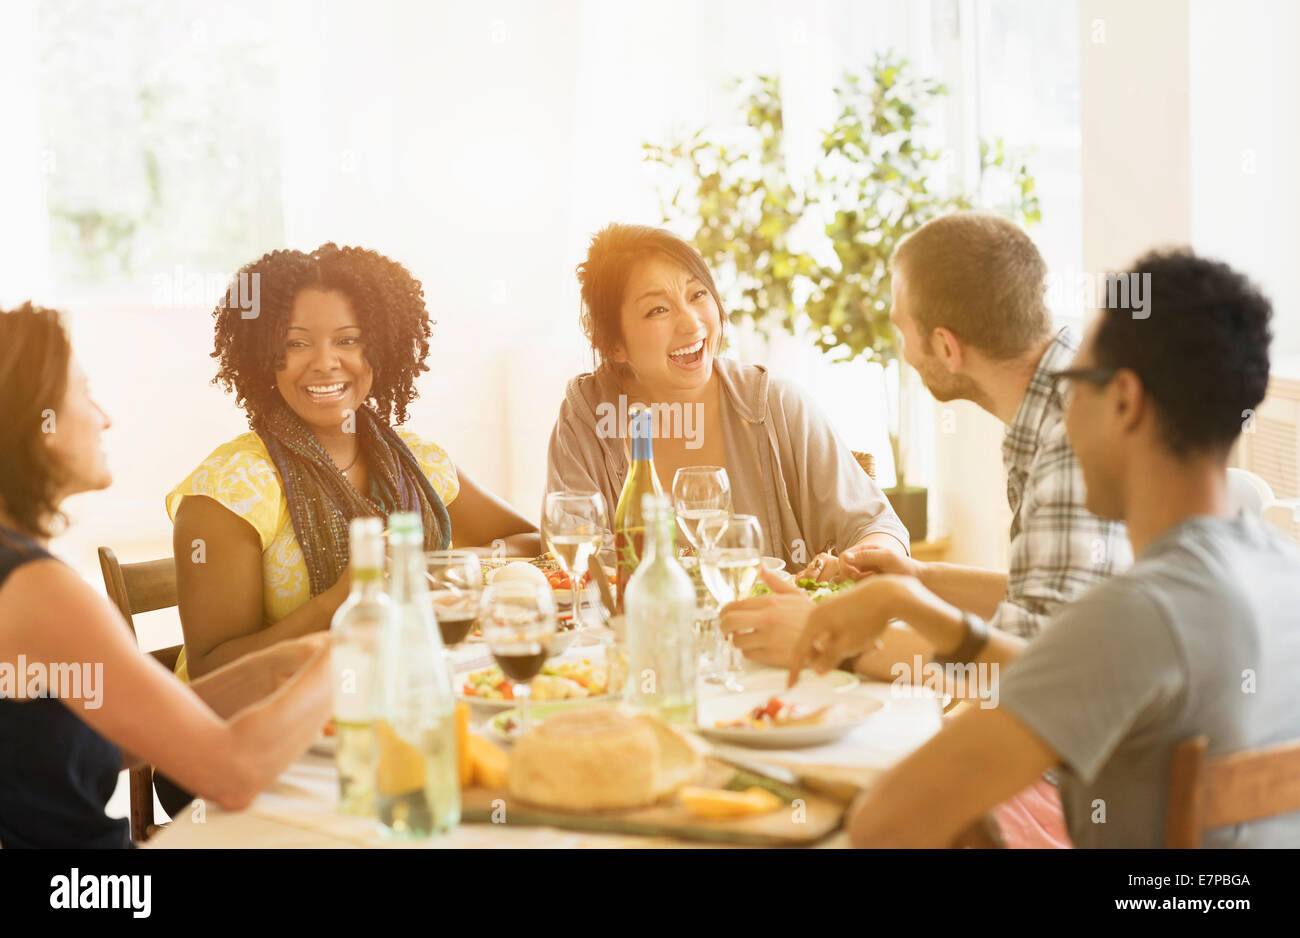 Group of friends enjoying dinner party Stock Photo